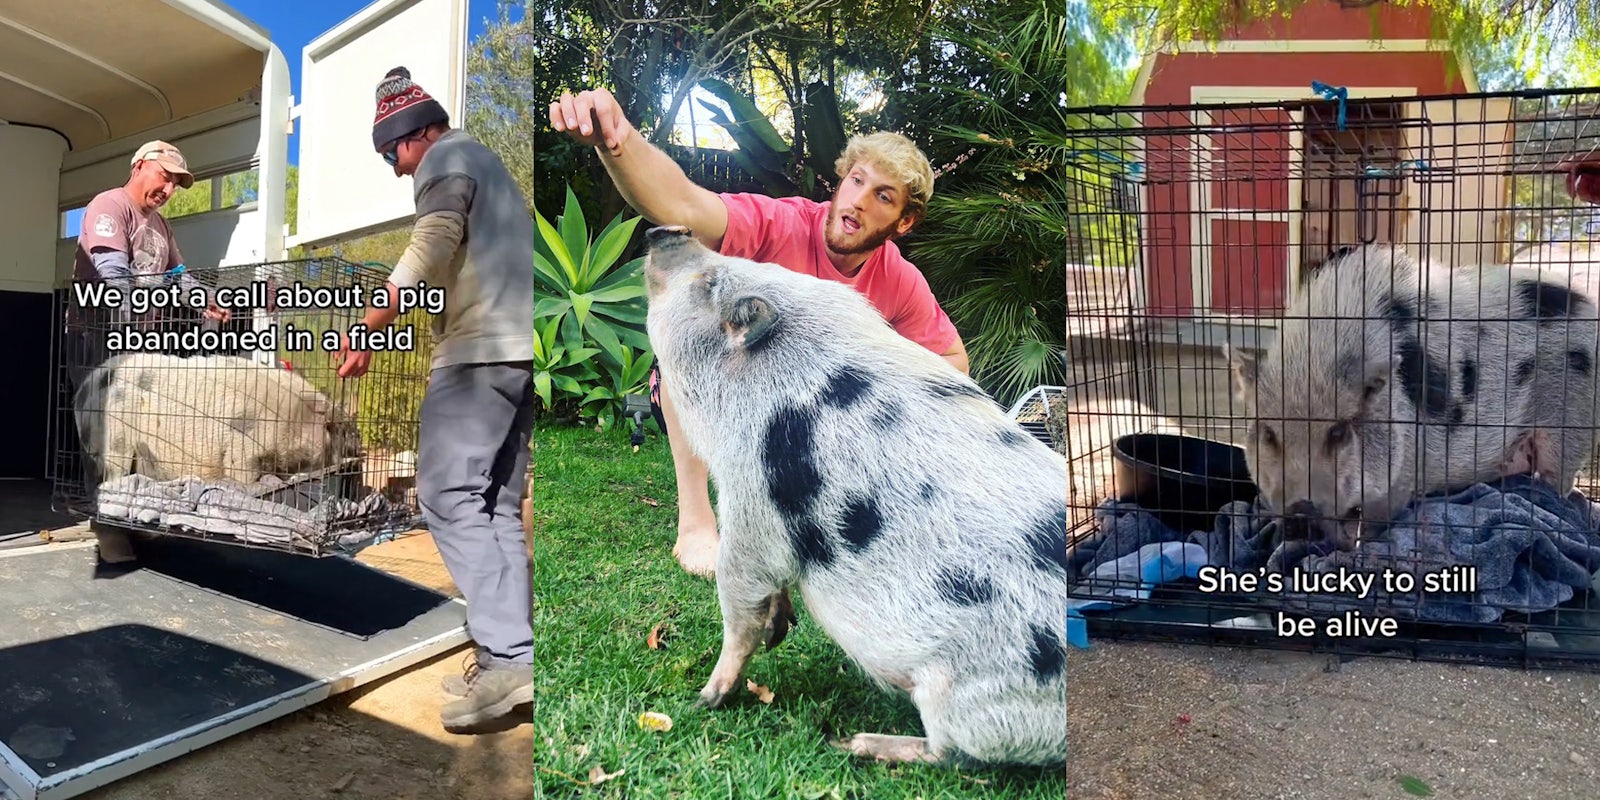 men carrying crate with pig inside out of trailer caption 'We got a call about a pig abandoned in a field' (l) Logan Paul playing with pet pig in yard (c) pig in crate with caption 'She's lucky to be alive' (r)